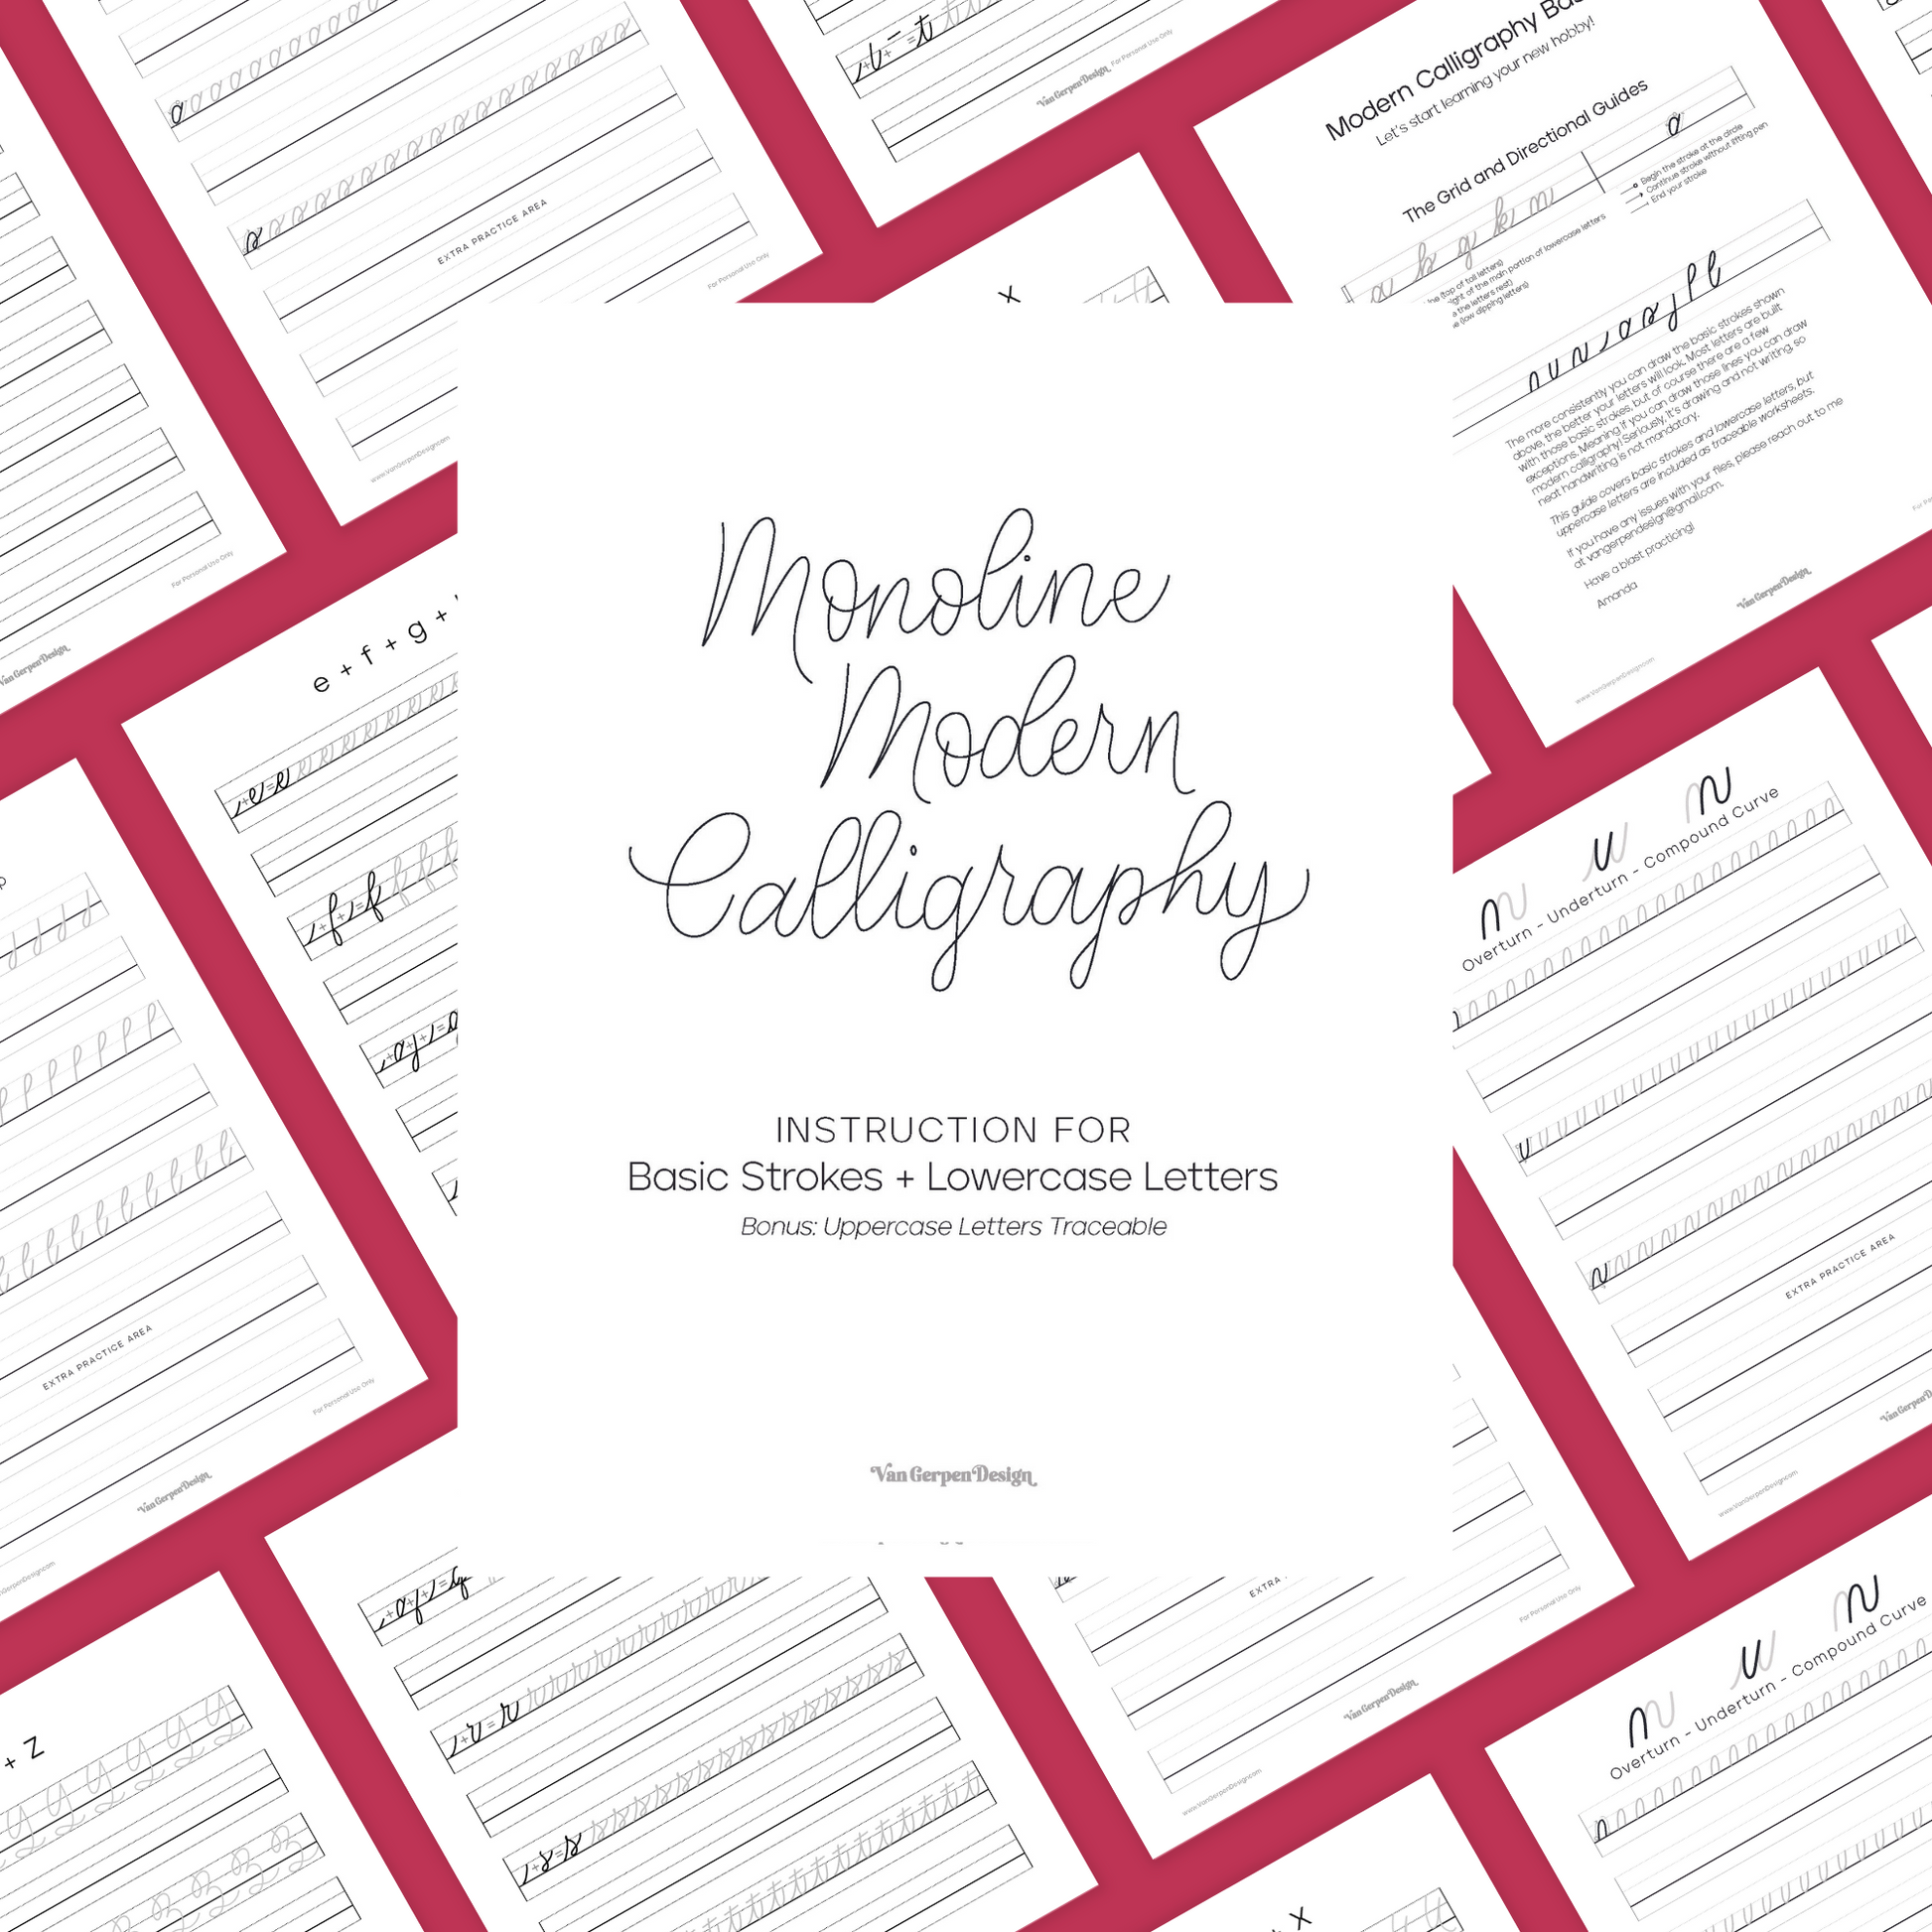 Advanced Modern Calligraphy Practice Workbook DIY by À L'AISE